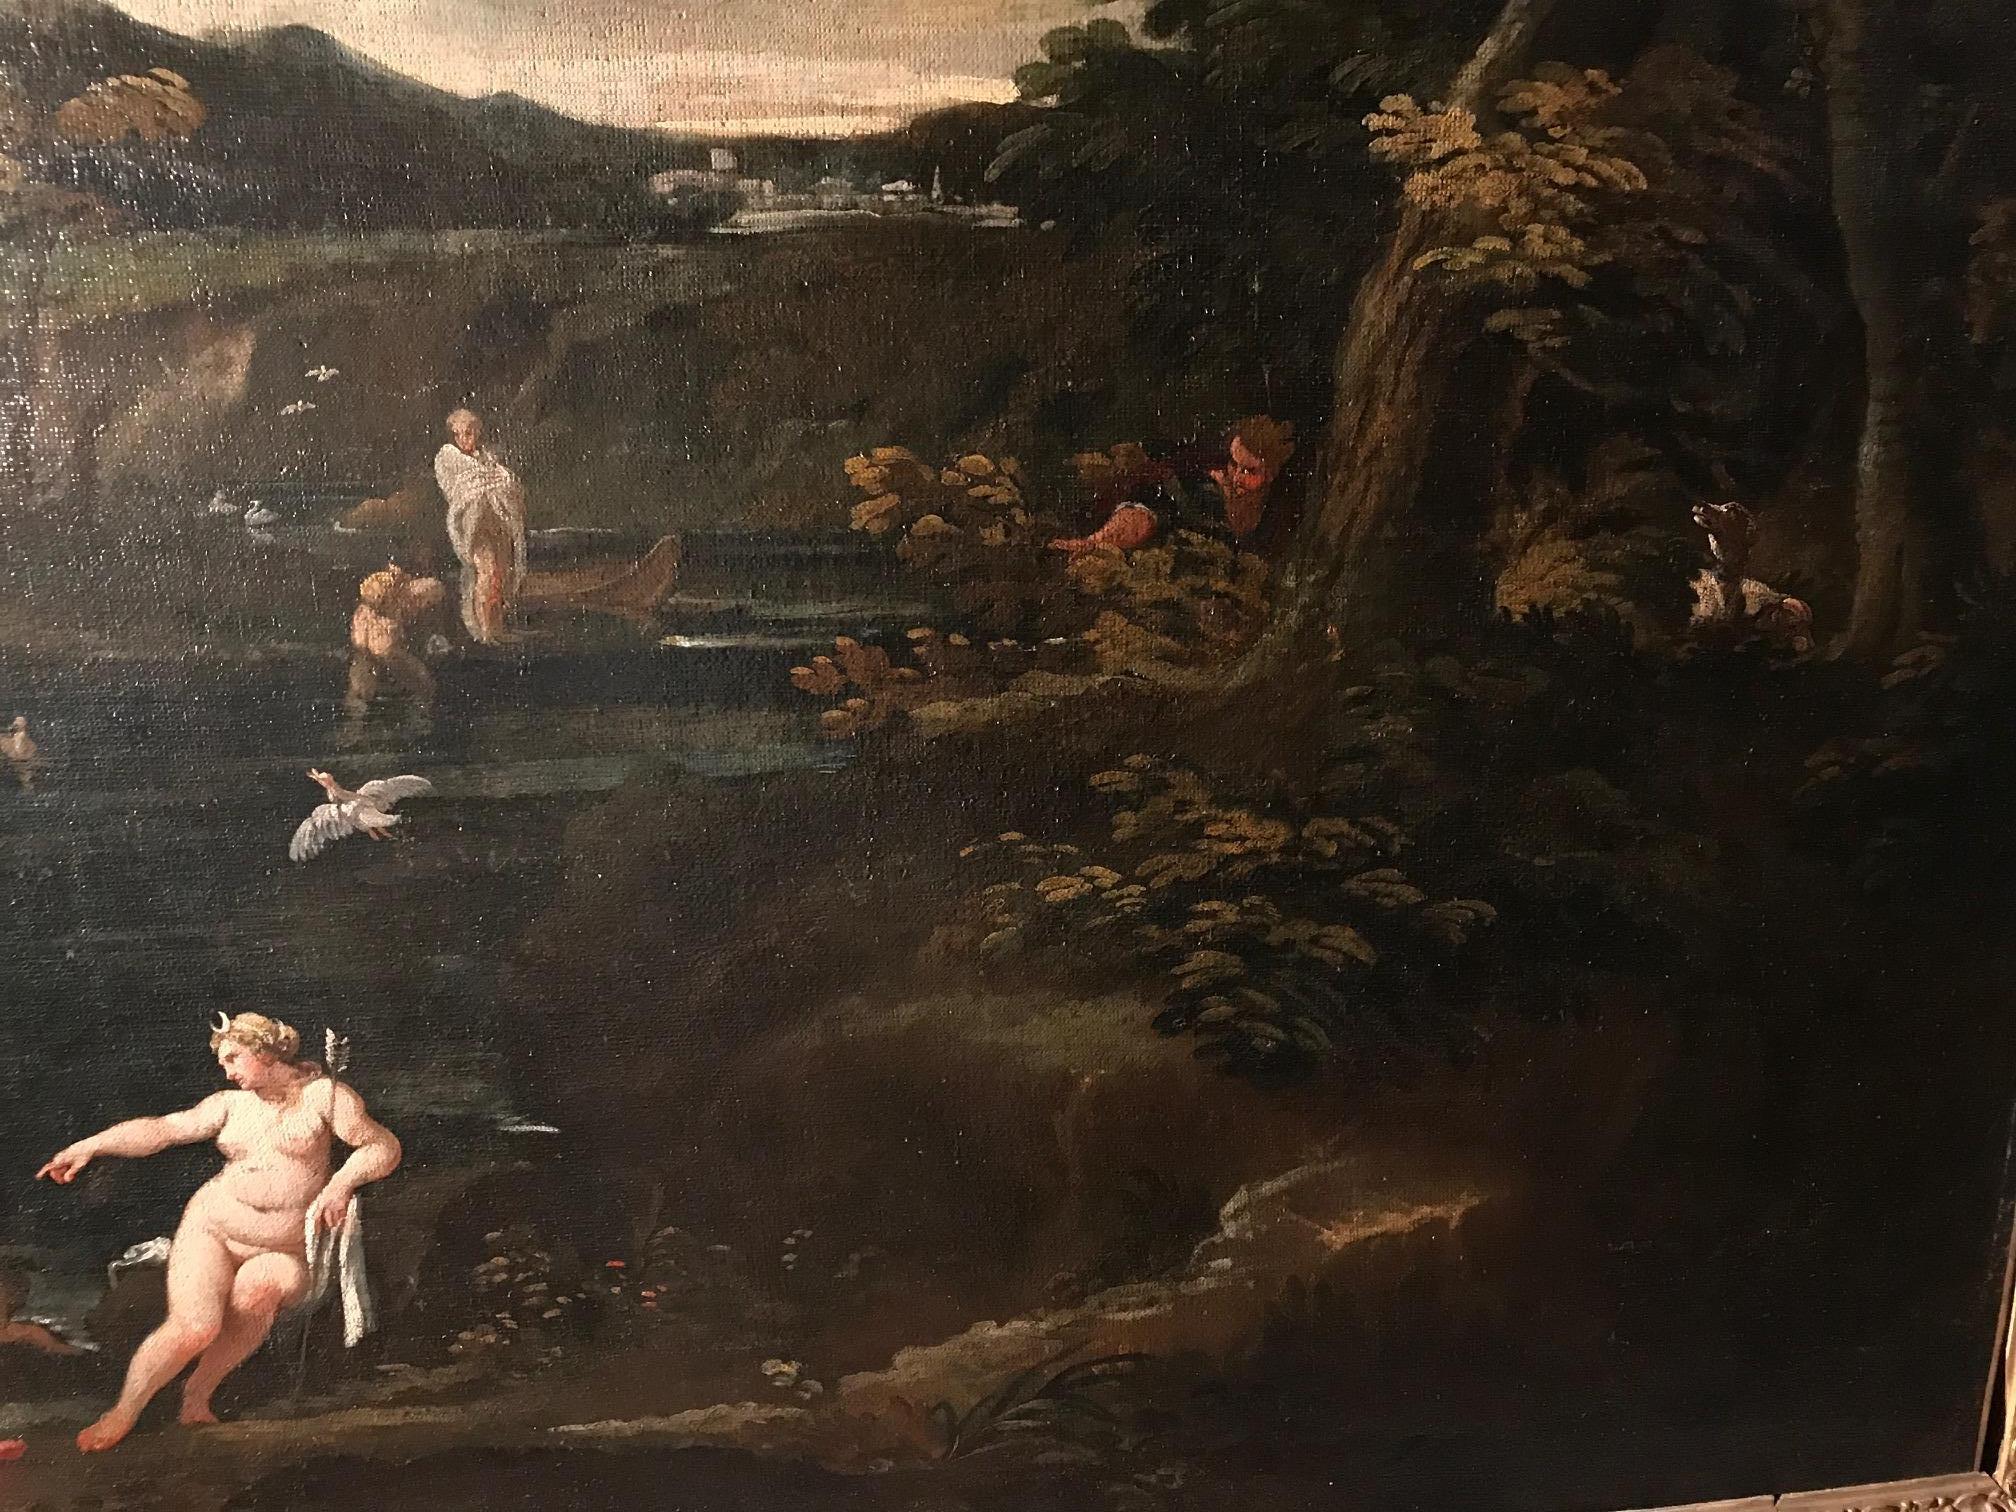 the story of actaeon